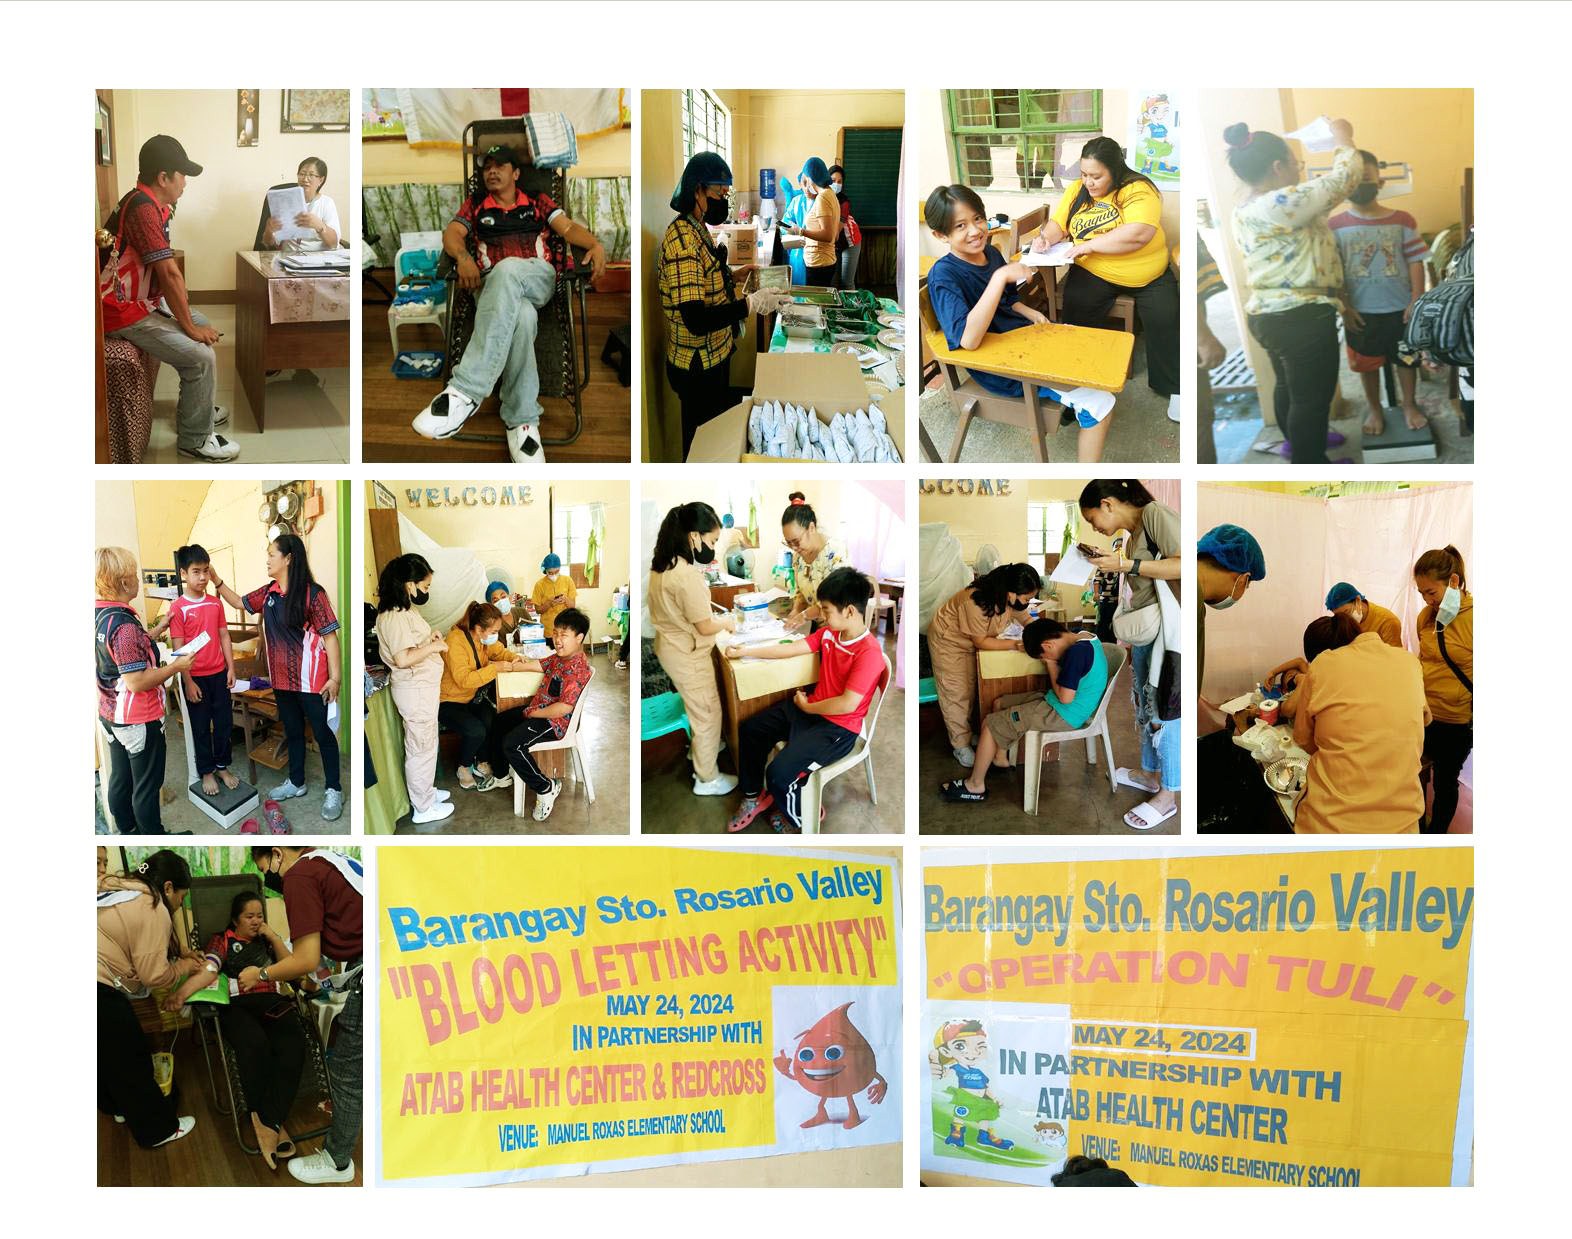 OPLAN TULI AND BLOOD LETTING ACTIVITY